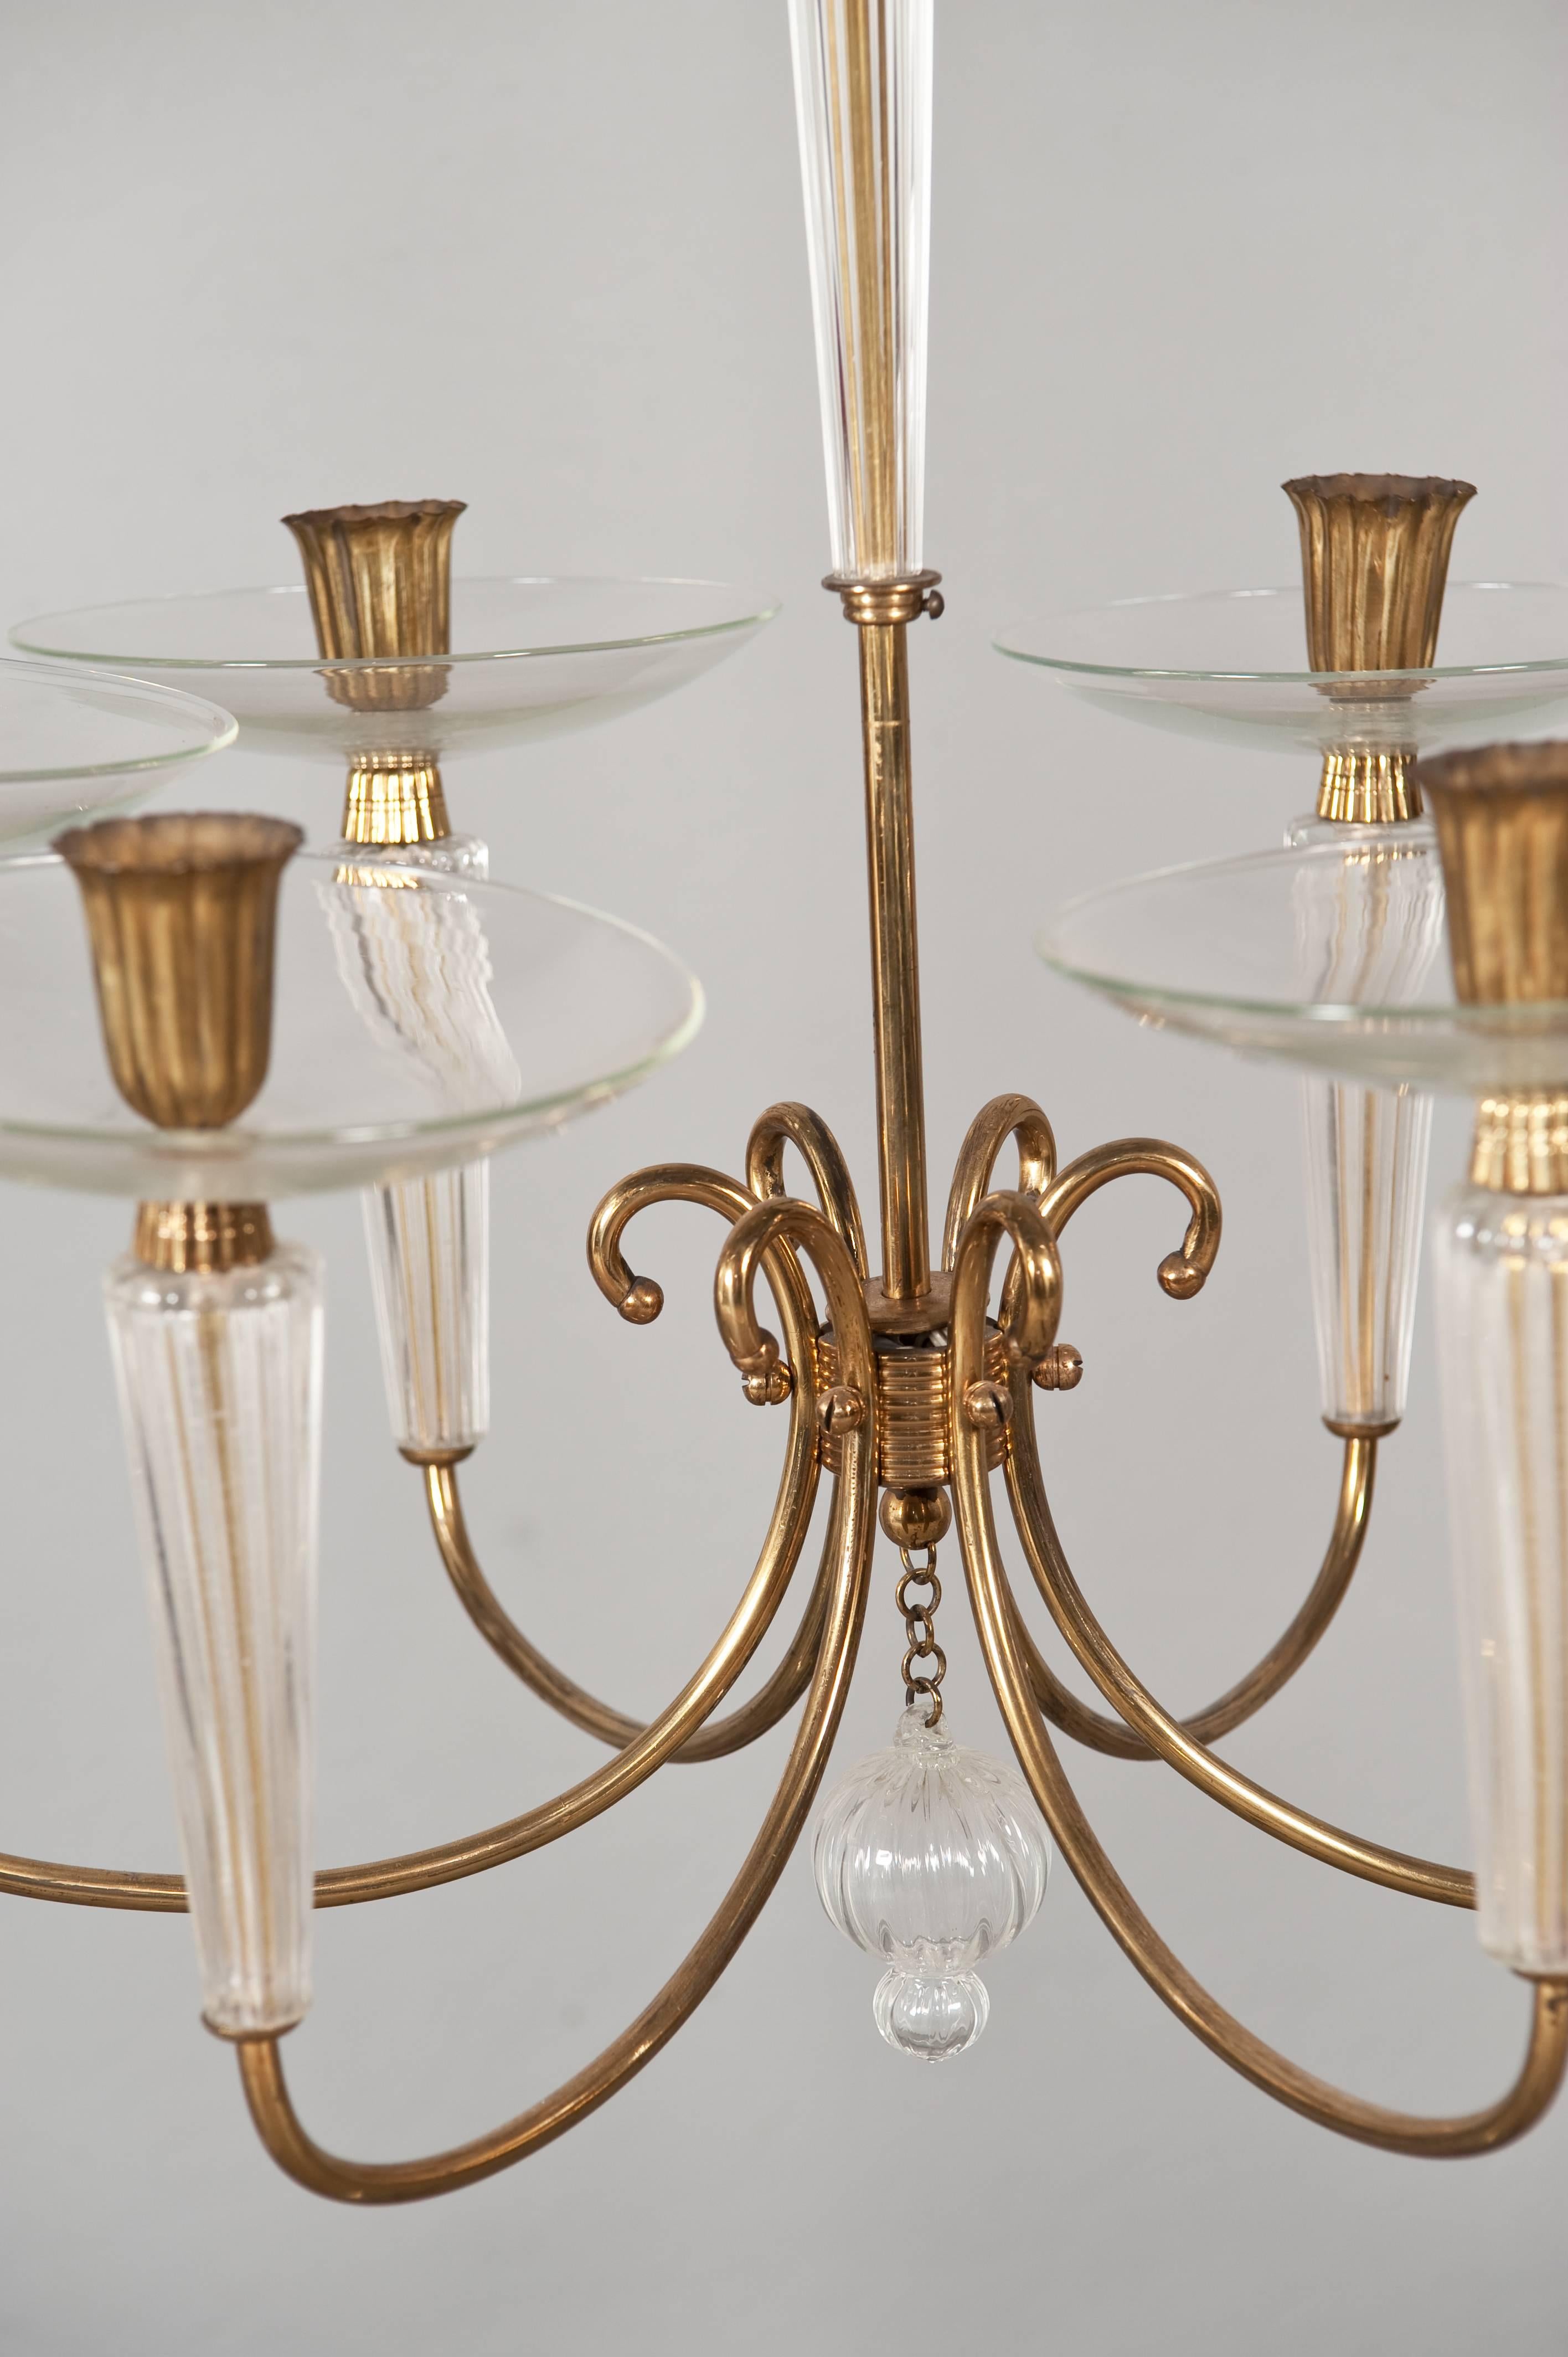 Italian Glamorous Brass and Glass Chandelier Attributed to Venini